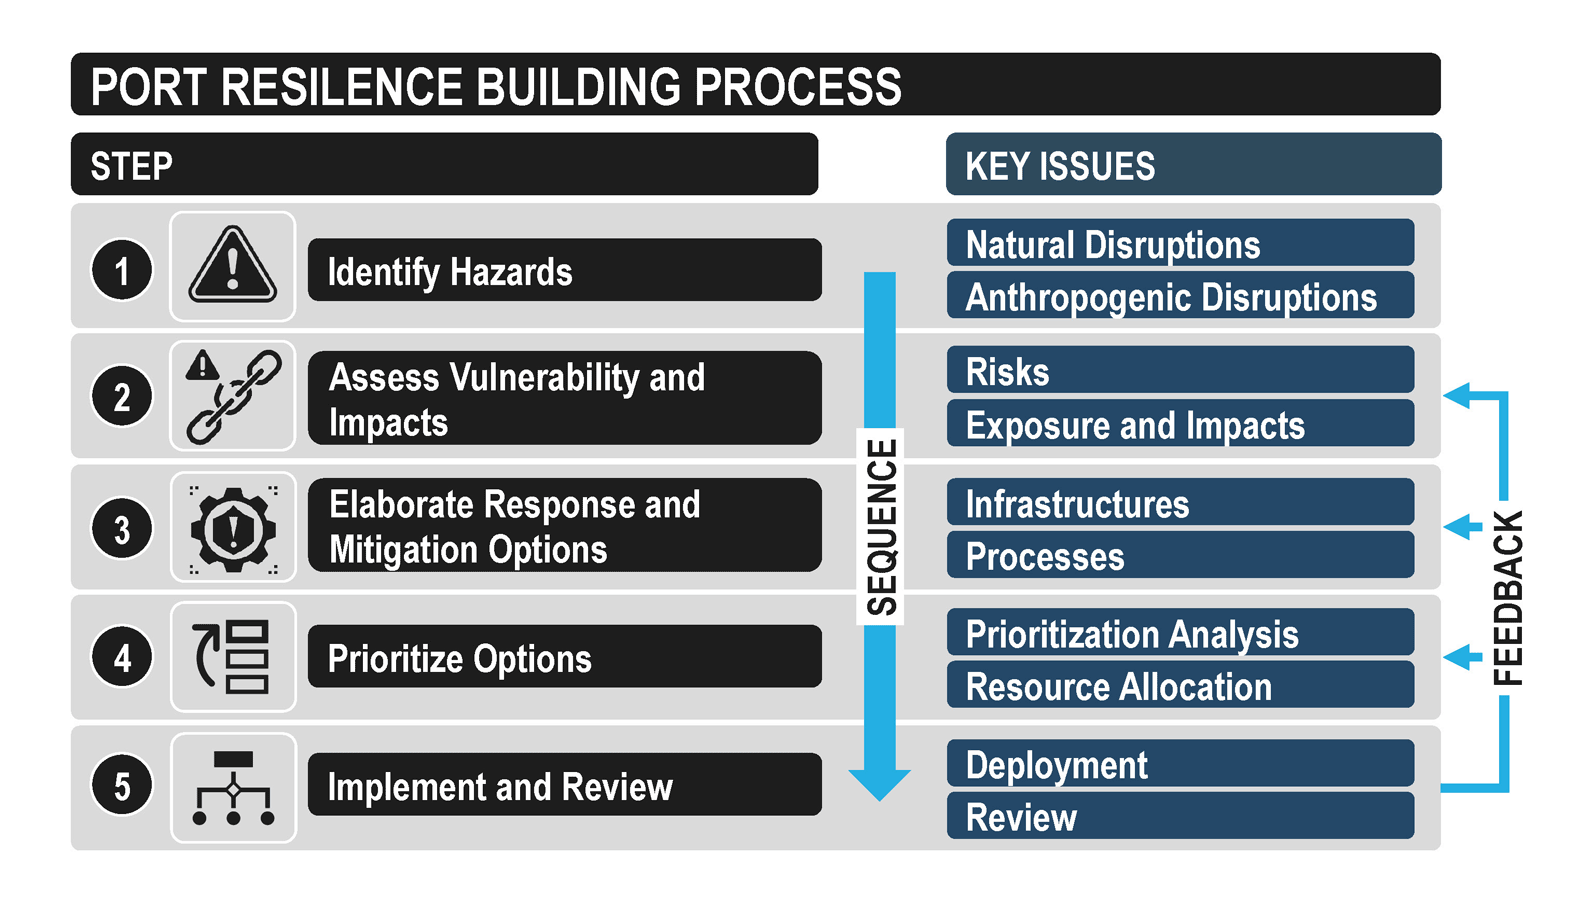 Port resilience-building process: A stepwise approach